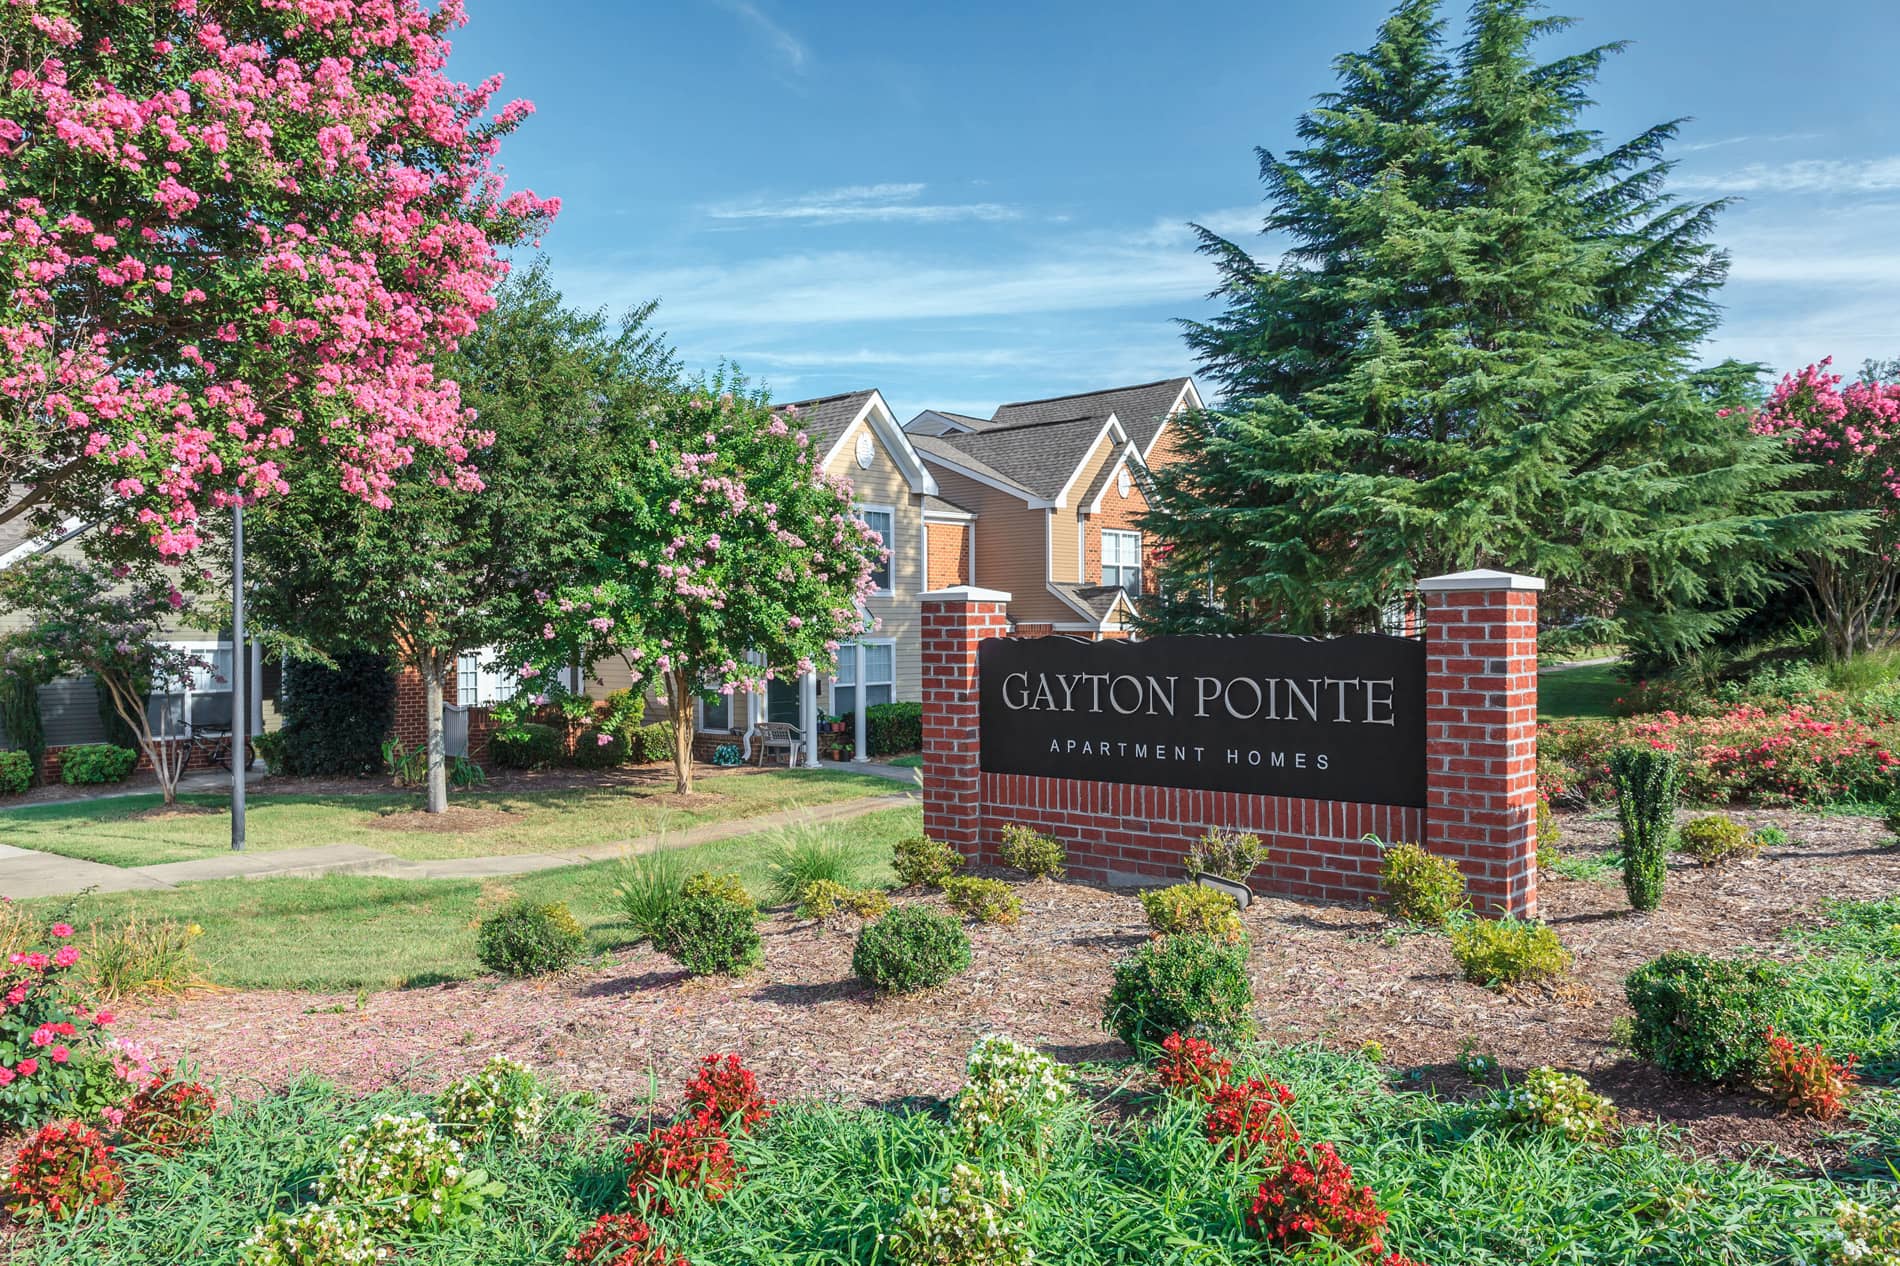 Gayton Pointe Townhomes Exterior Sign